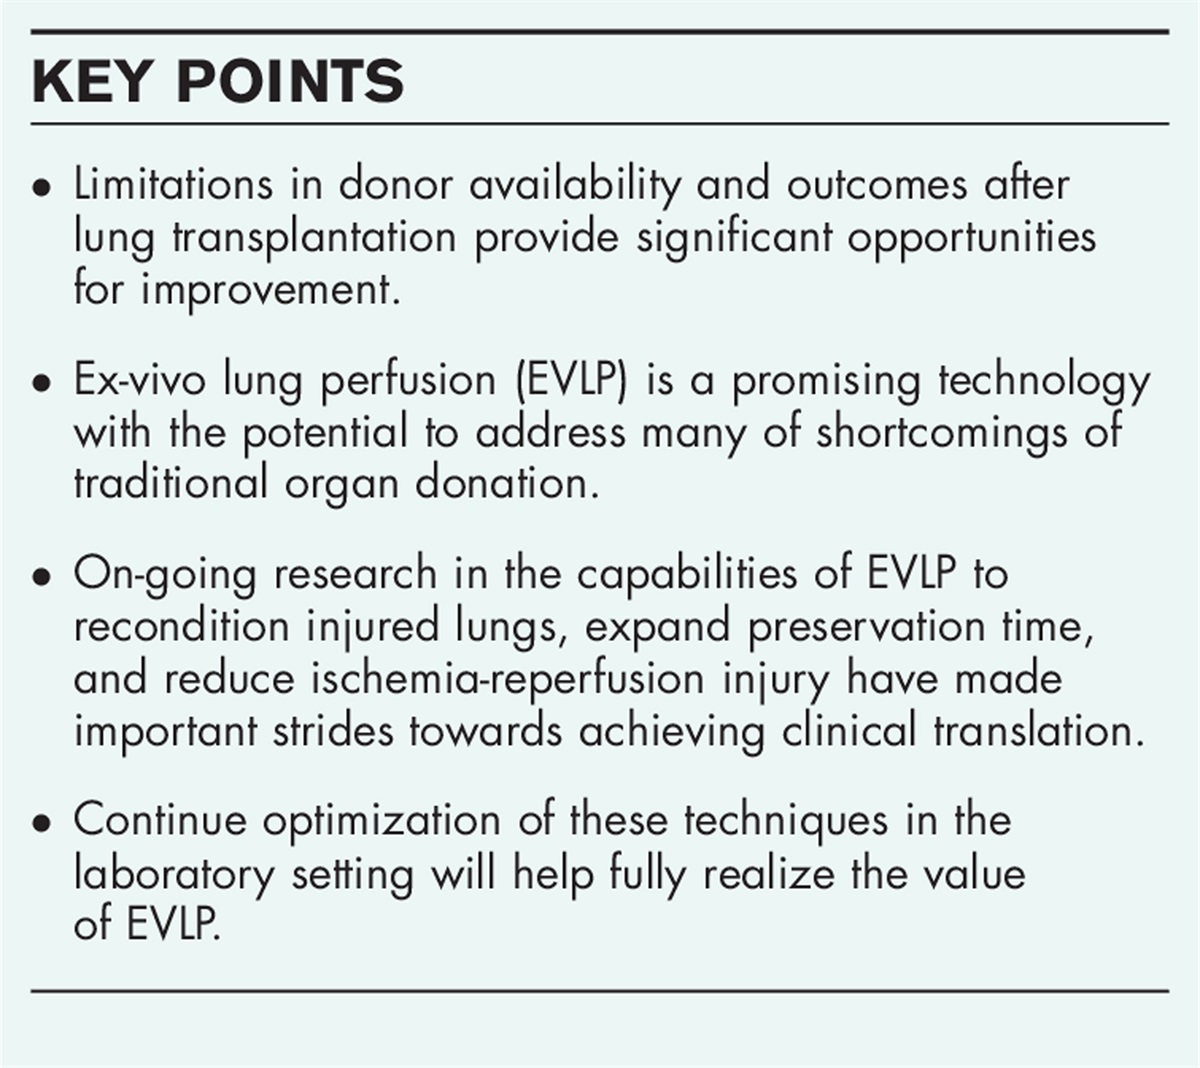 Ex-vivo lung perfusion therapies: do they add value to organ donation?